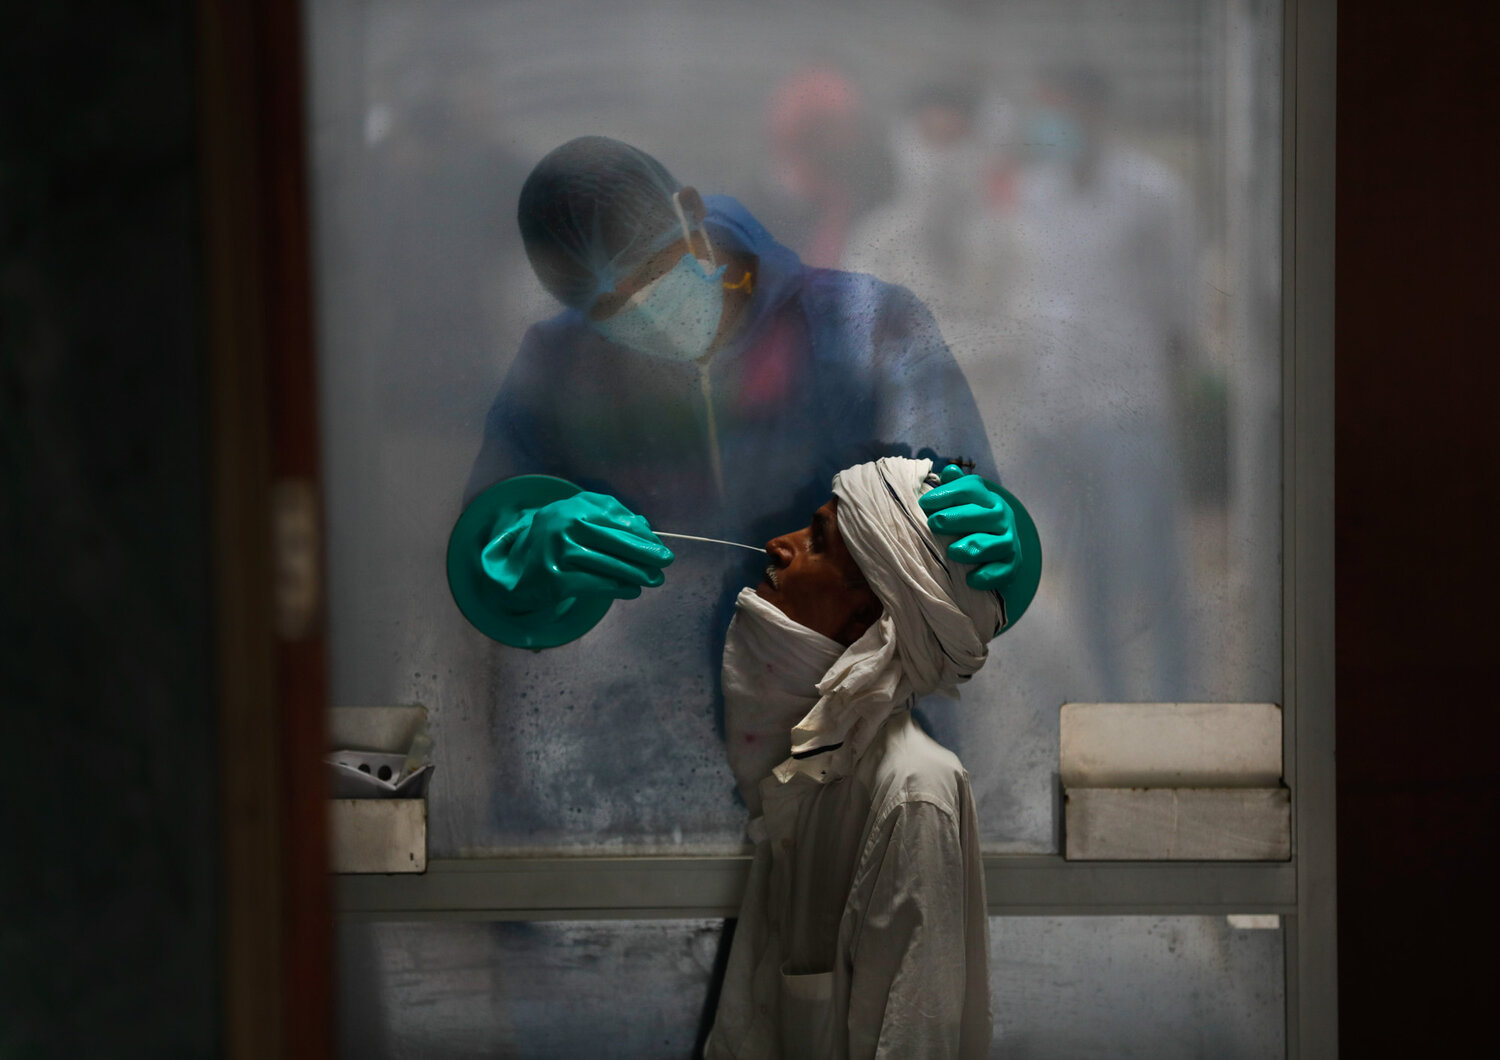  A health worker takes a nasal swab of a person for a COVID-19 test at a hospital in New Delhi, India, on July 6, 2020. (AP Photo/Manish Swarup) 